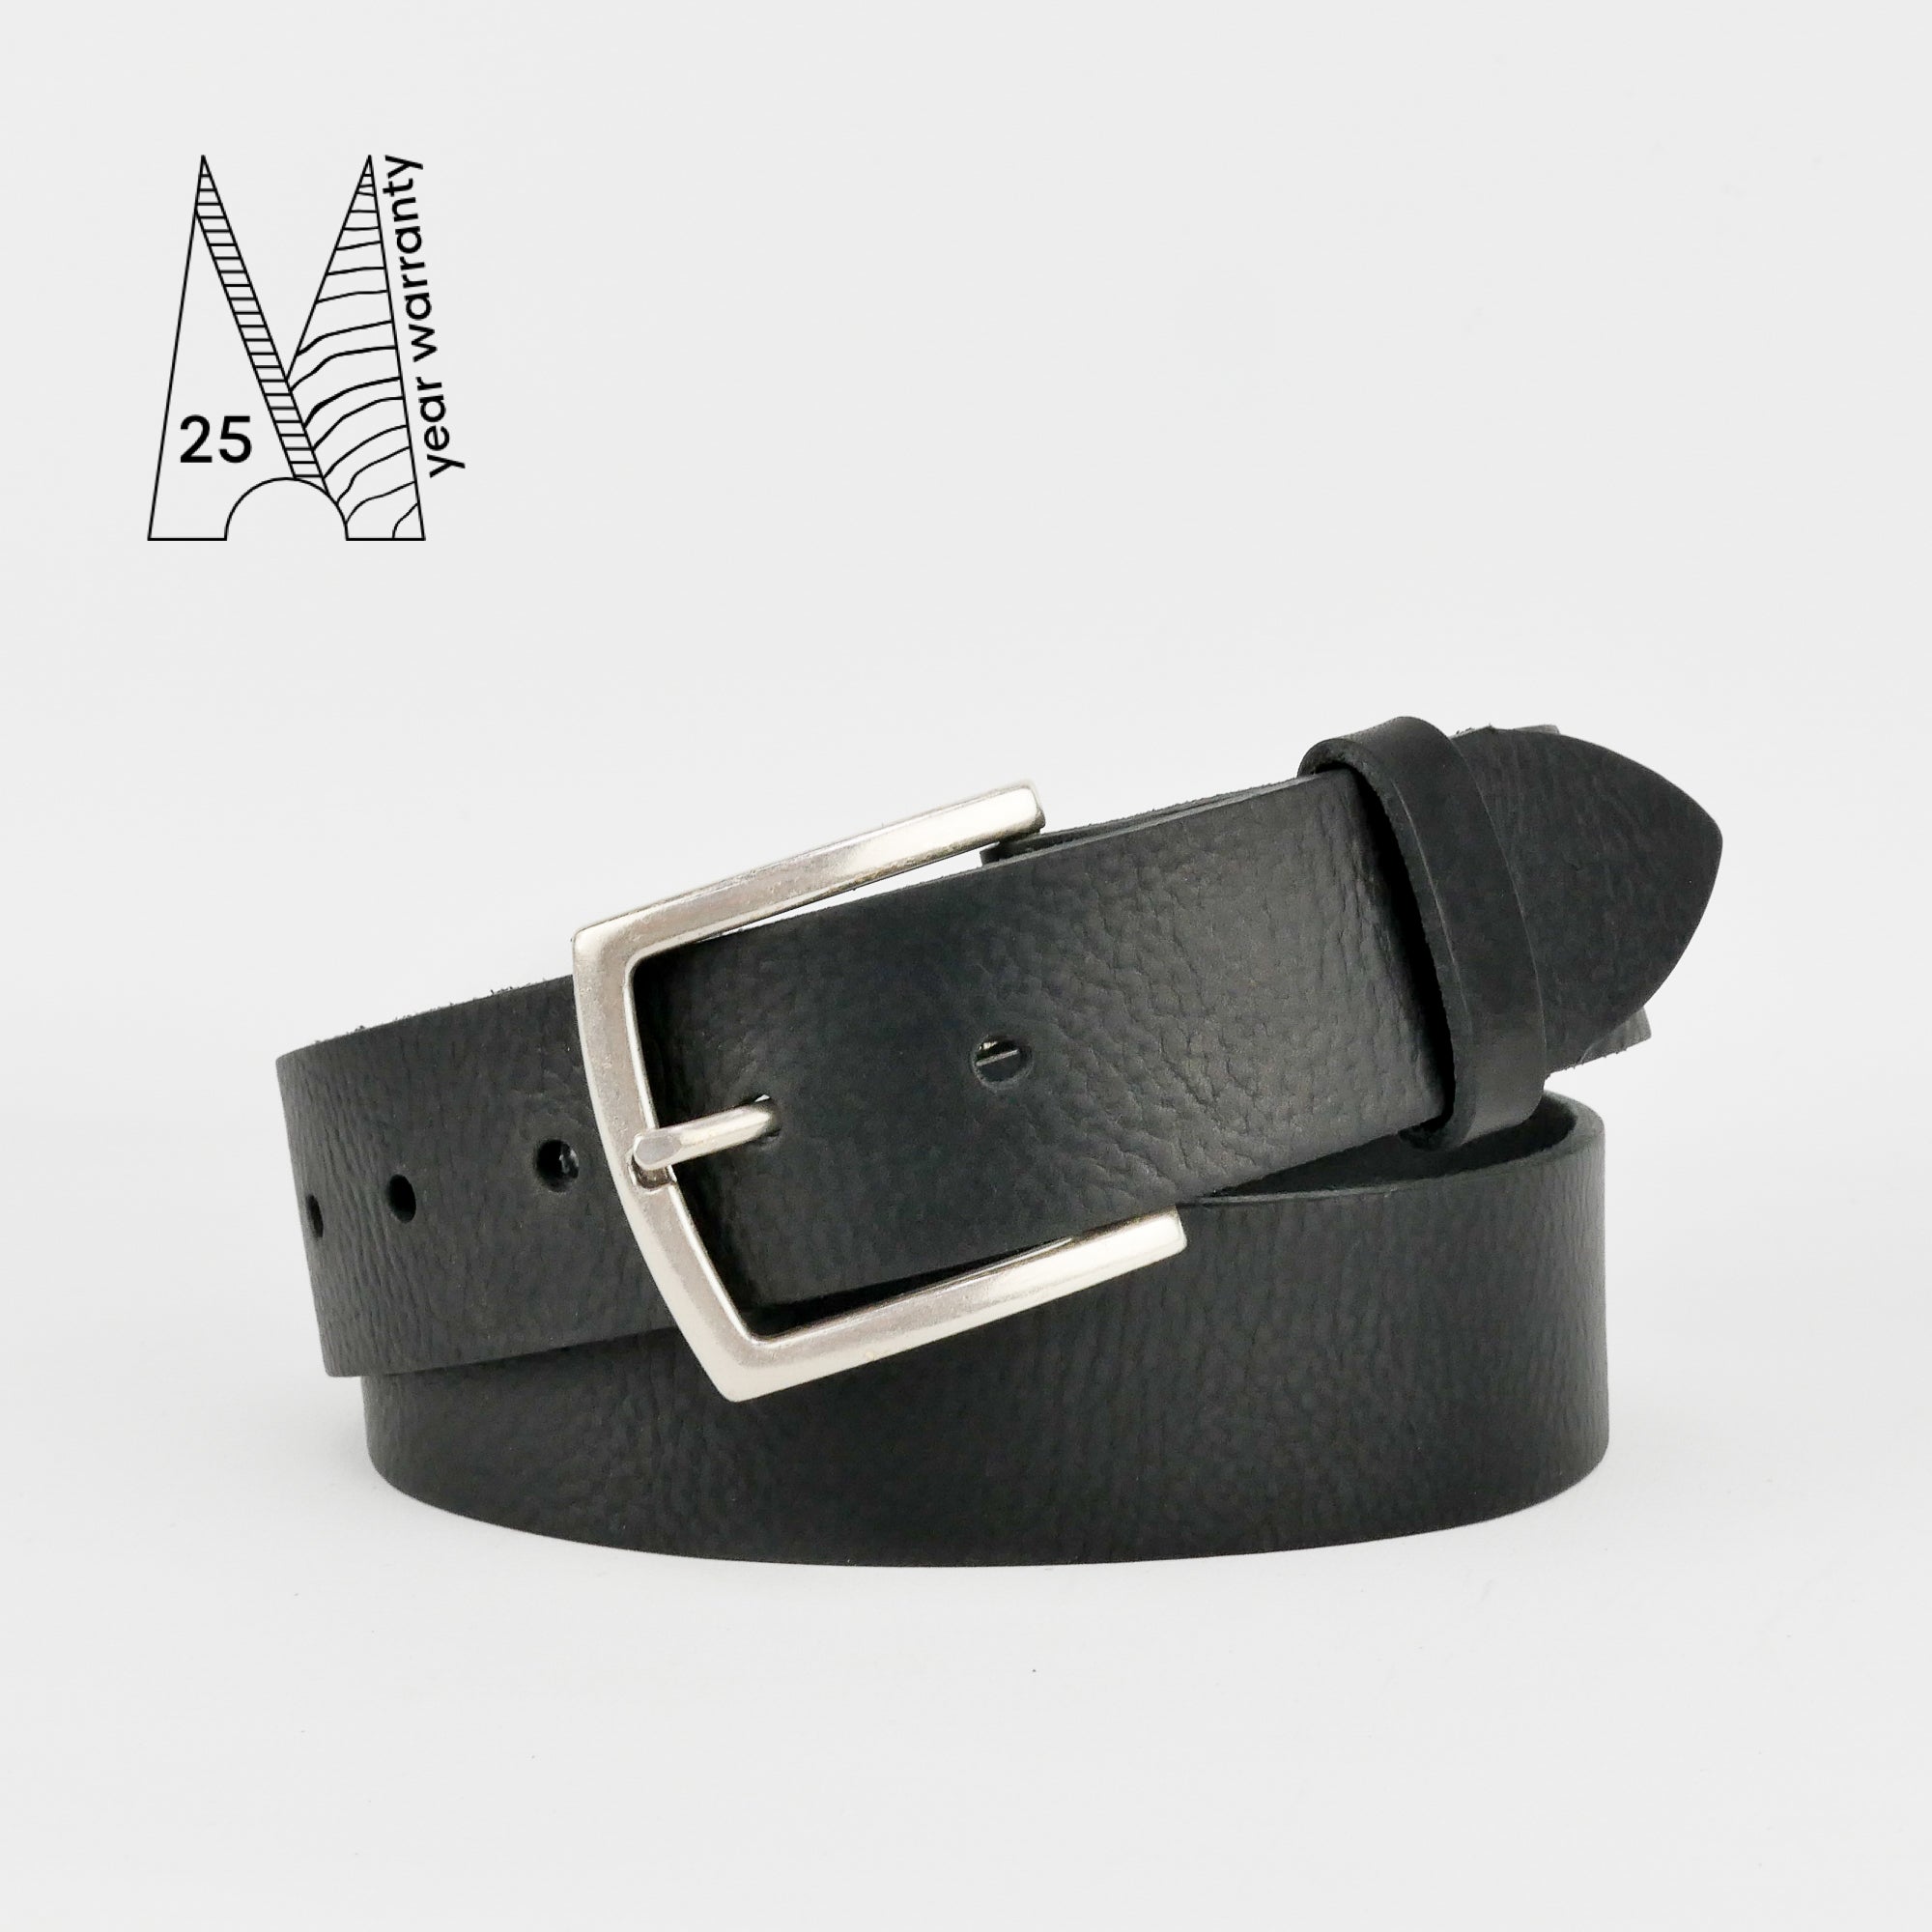 Women's thin belt handcrafted from black soft leather ideal for dresse